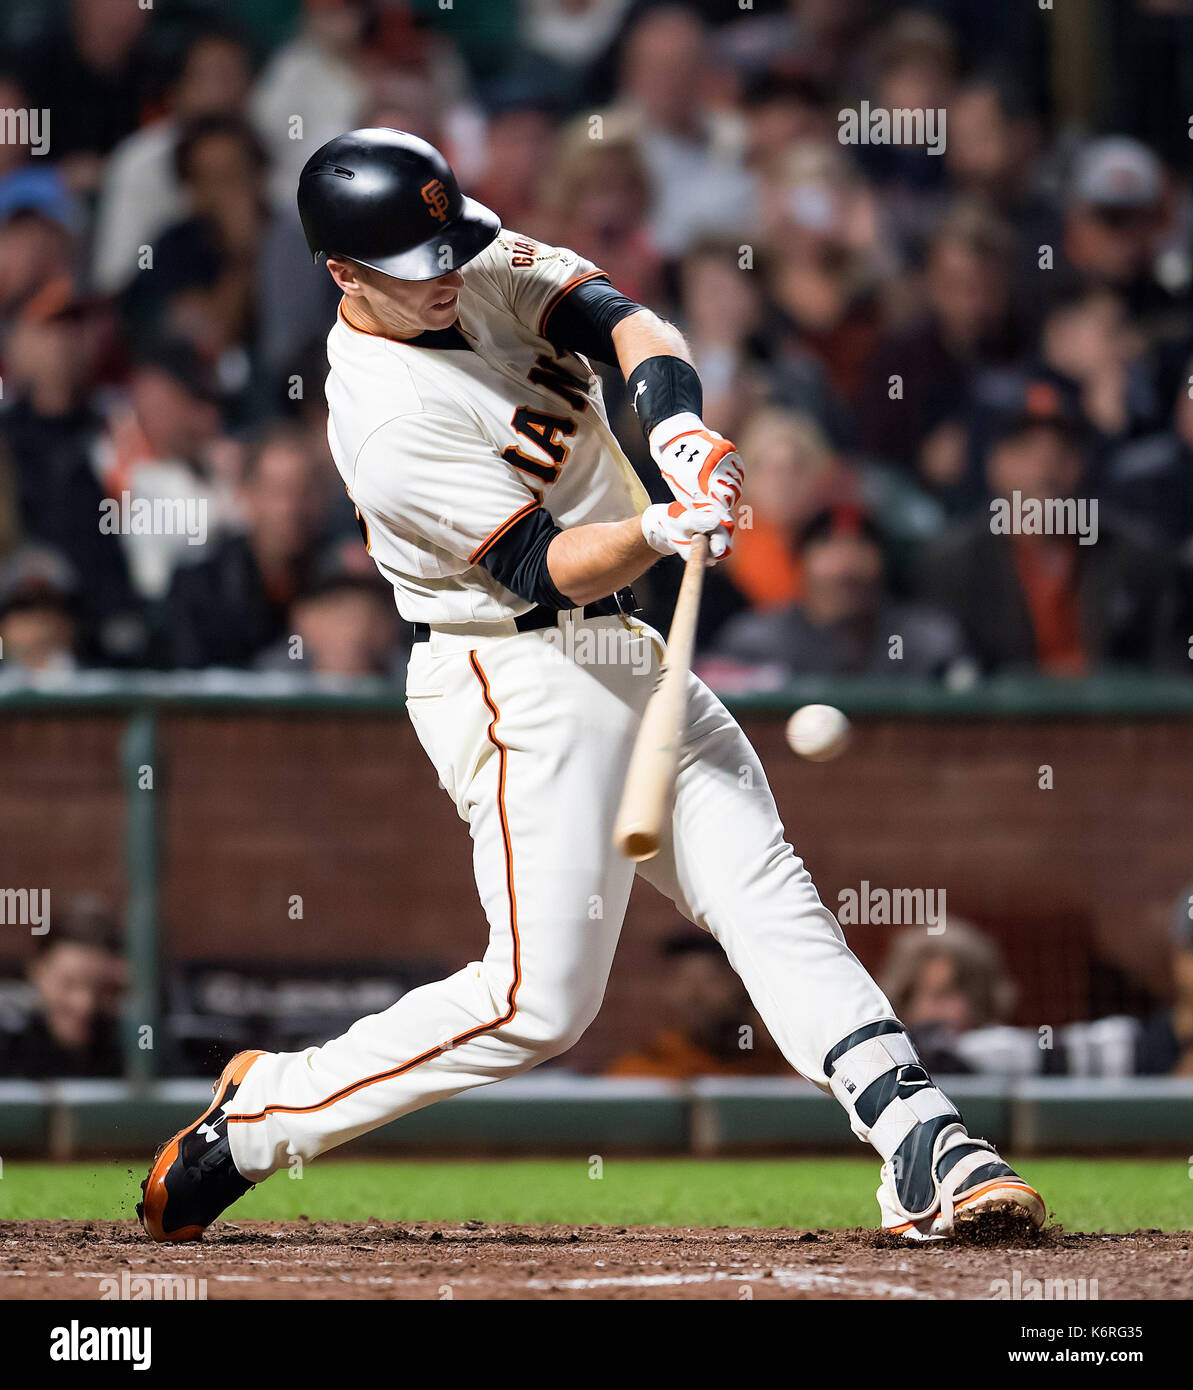 San Francisco, California, USA. 13th Sep, 2017. San Francisco Giants first baseman Buster Posey (28) fouls out during the second inning of a MLB game between the Los Angeles Dodgers and the San Francisco Giants at AT&T Park in San Francisco, California. Valerie Shoaps/CSM/Alamy Live News Stock Photo